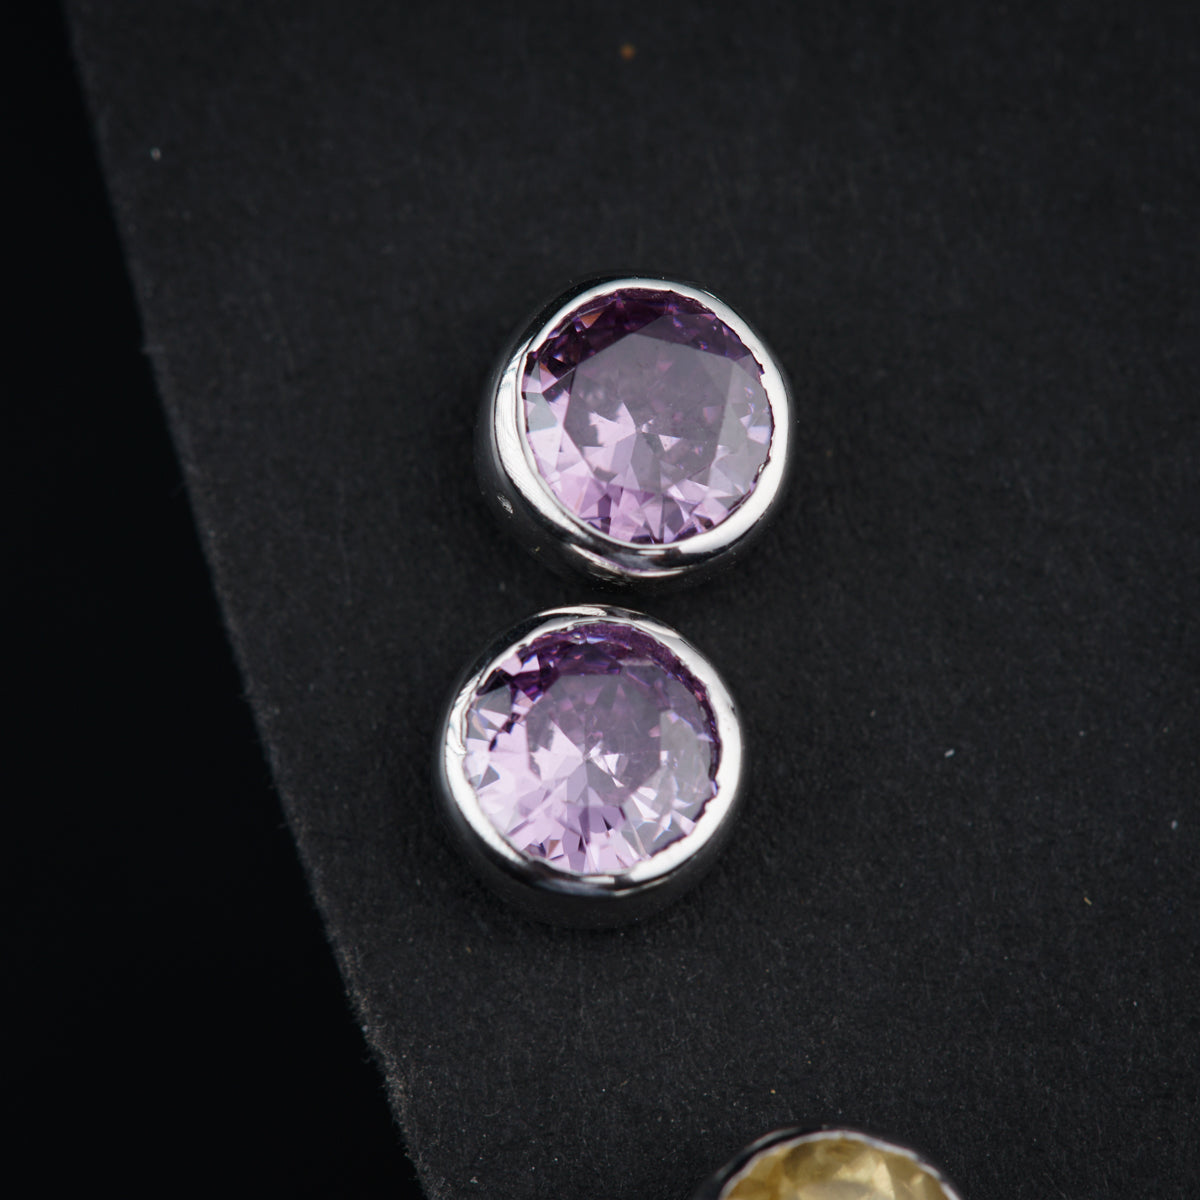 a pair of purple stones sitting on top of a black surface